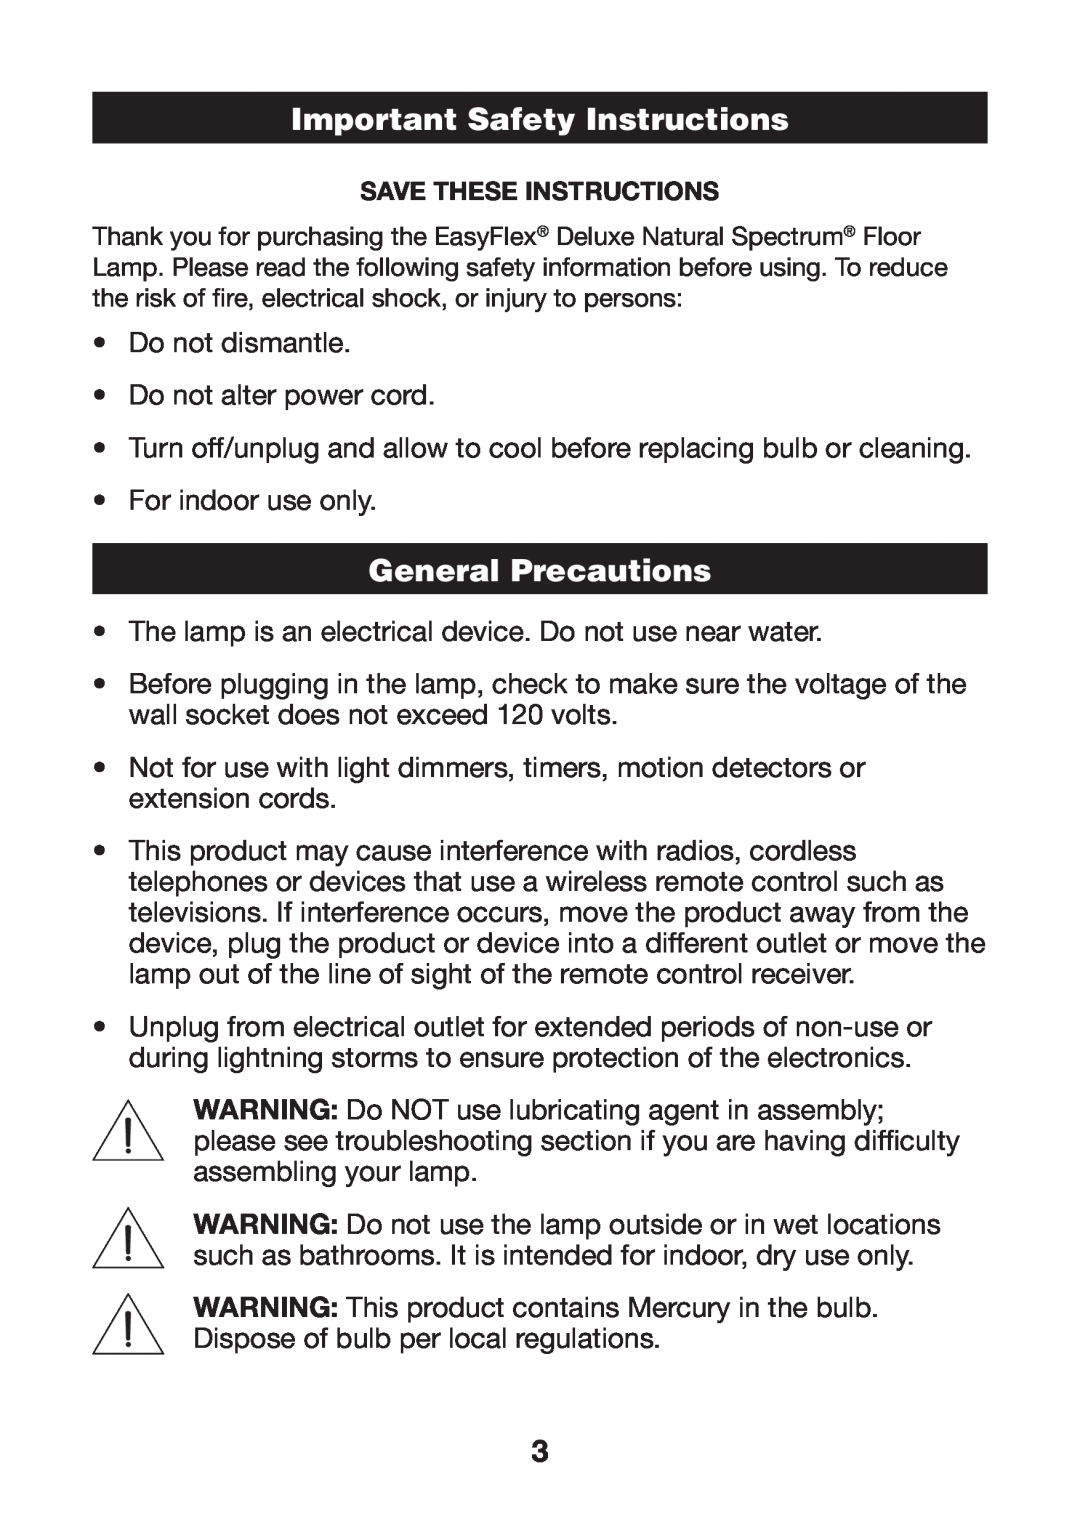 Verilux VF02 manual Important Safety Instructions, General Precautions 